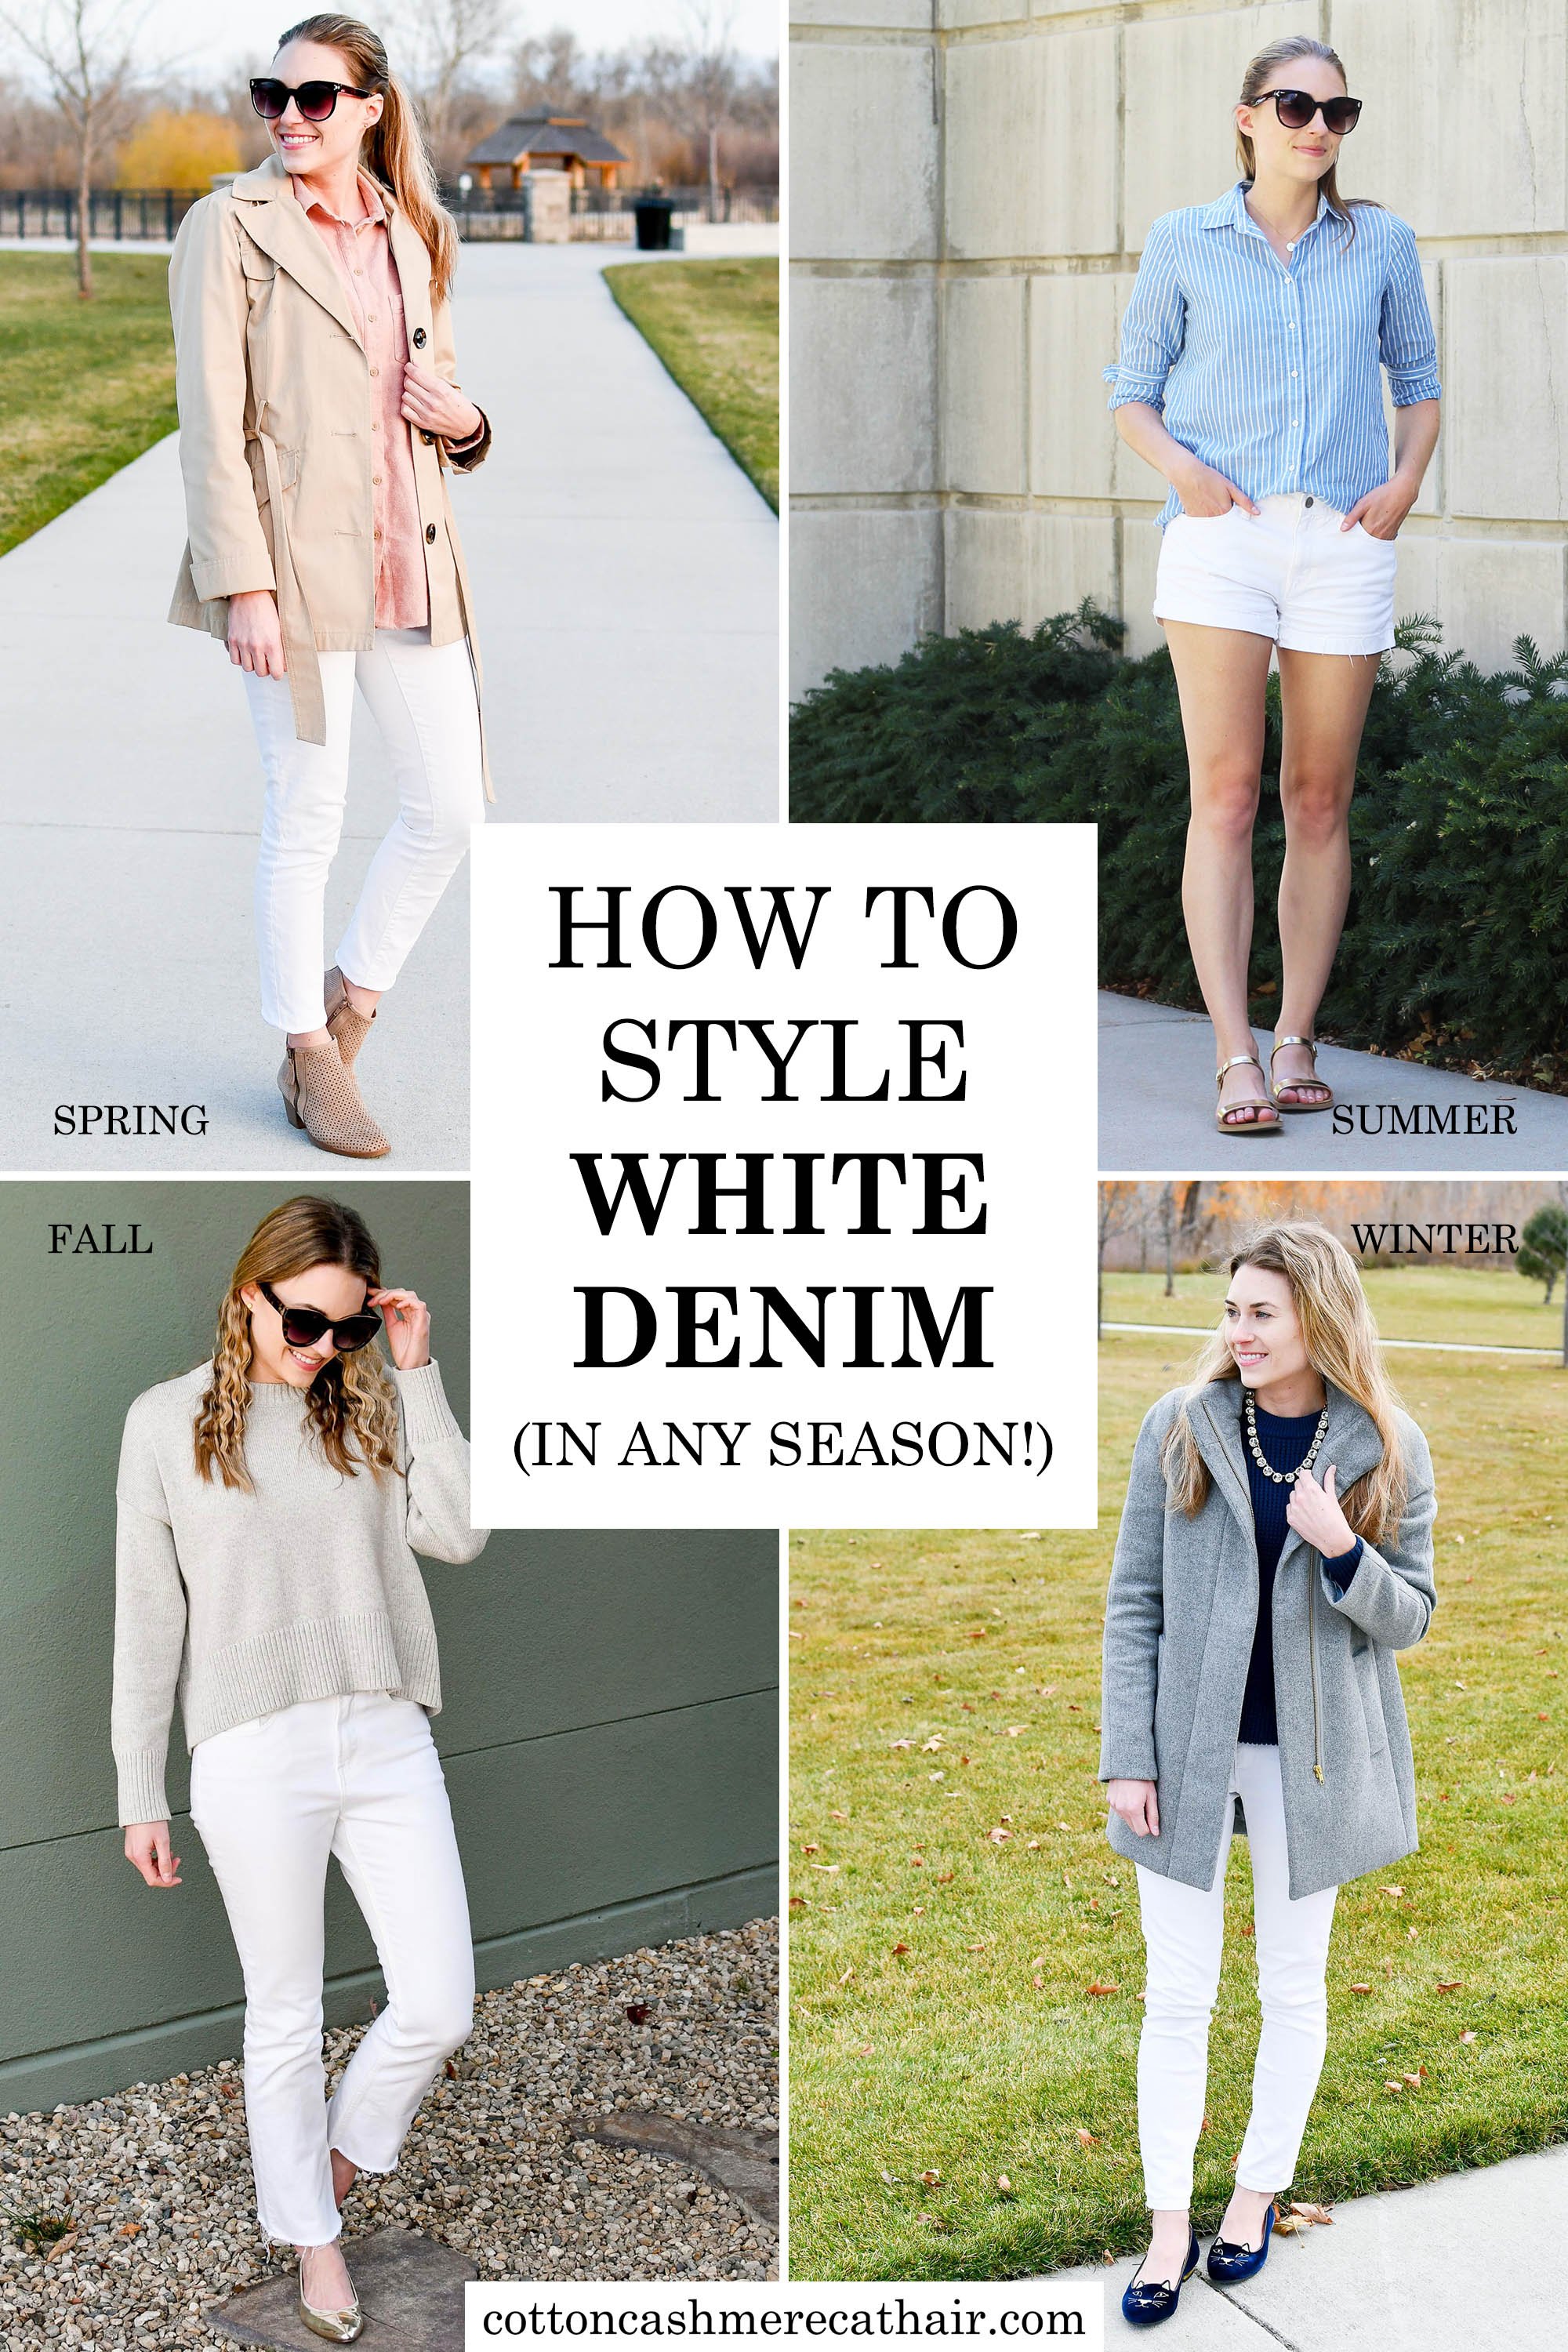 How to Style White Denim (in Any Season!)